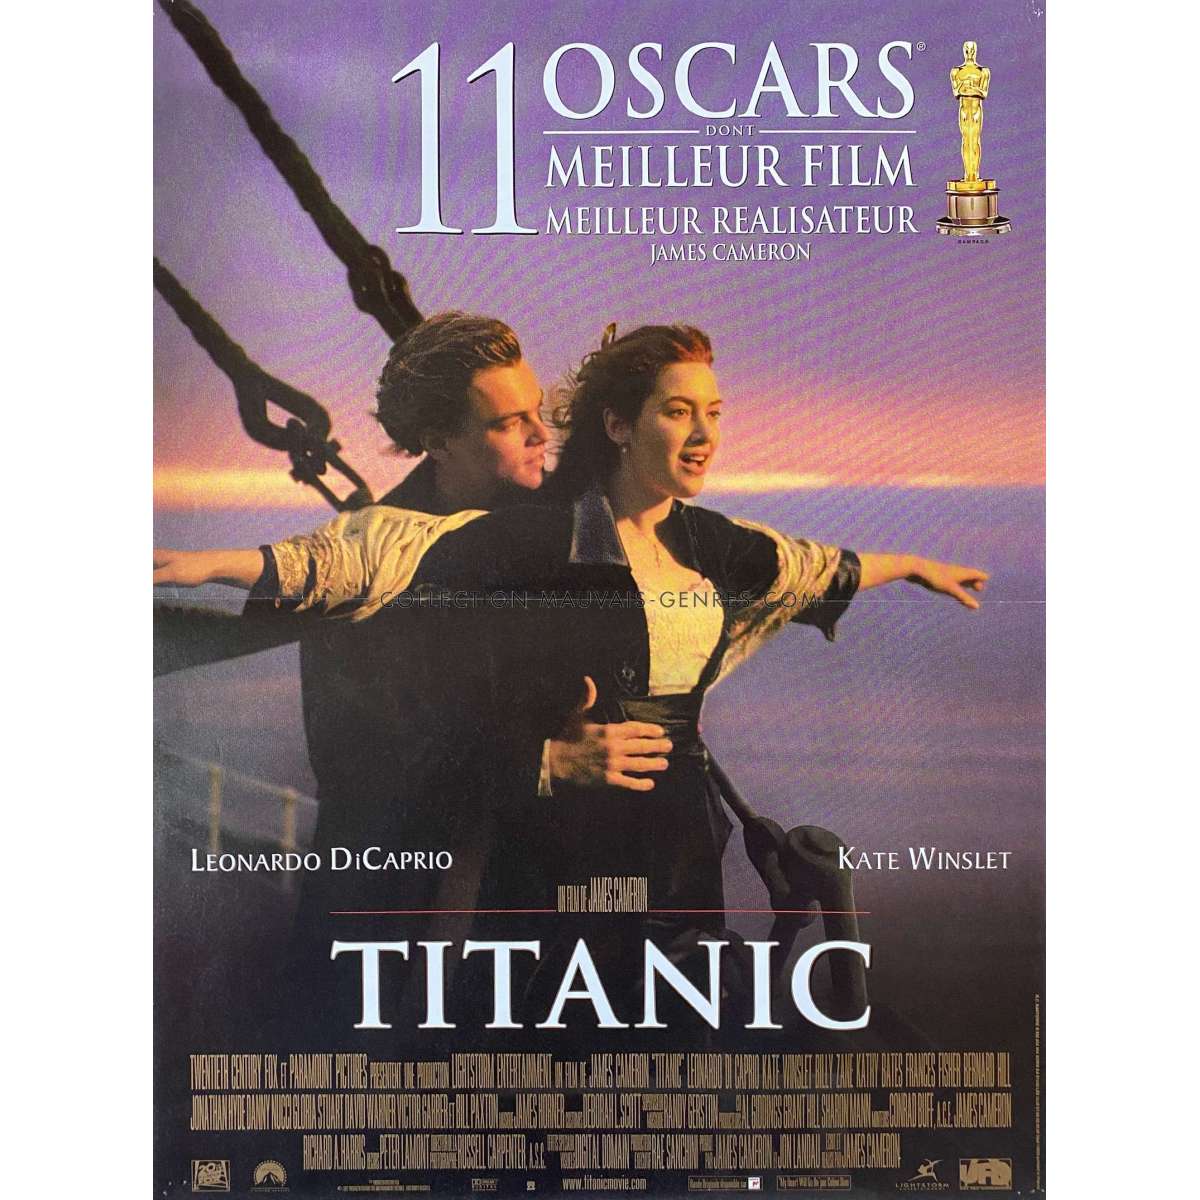 TITANIC French Movie Poster - 15x21 in. - 1997 Oscars style.